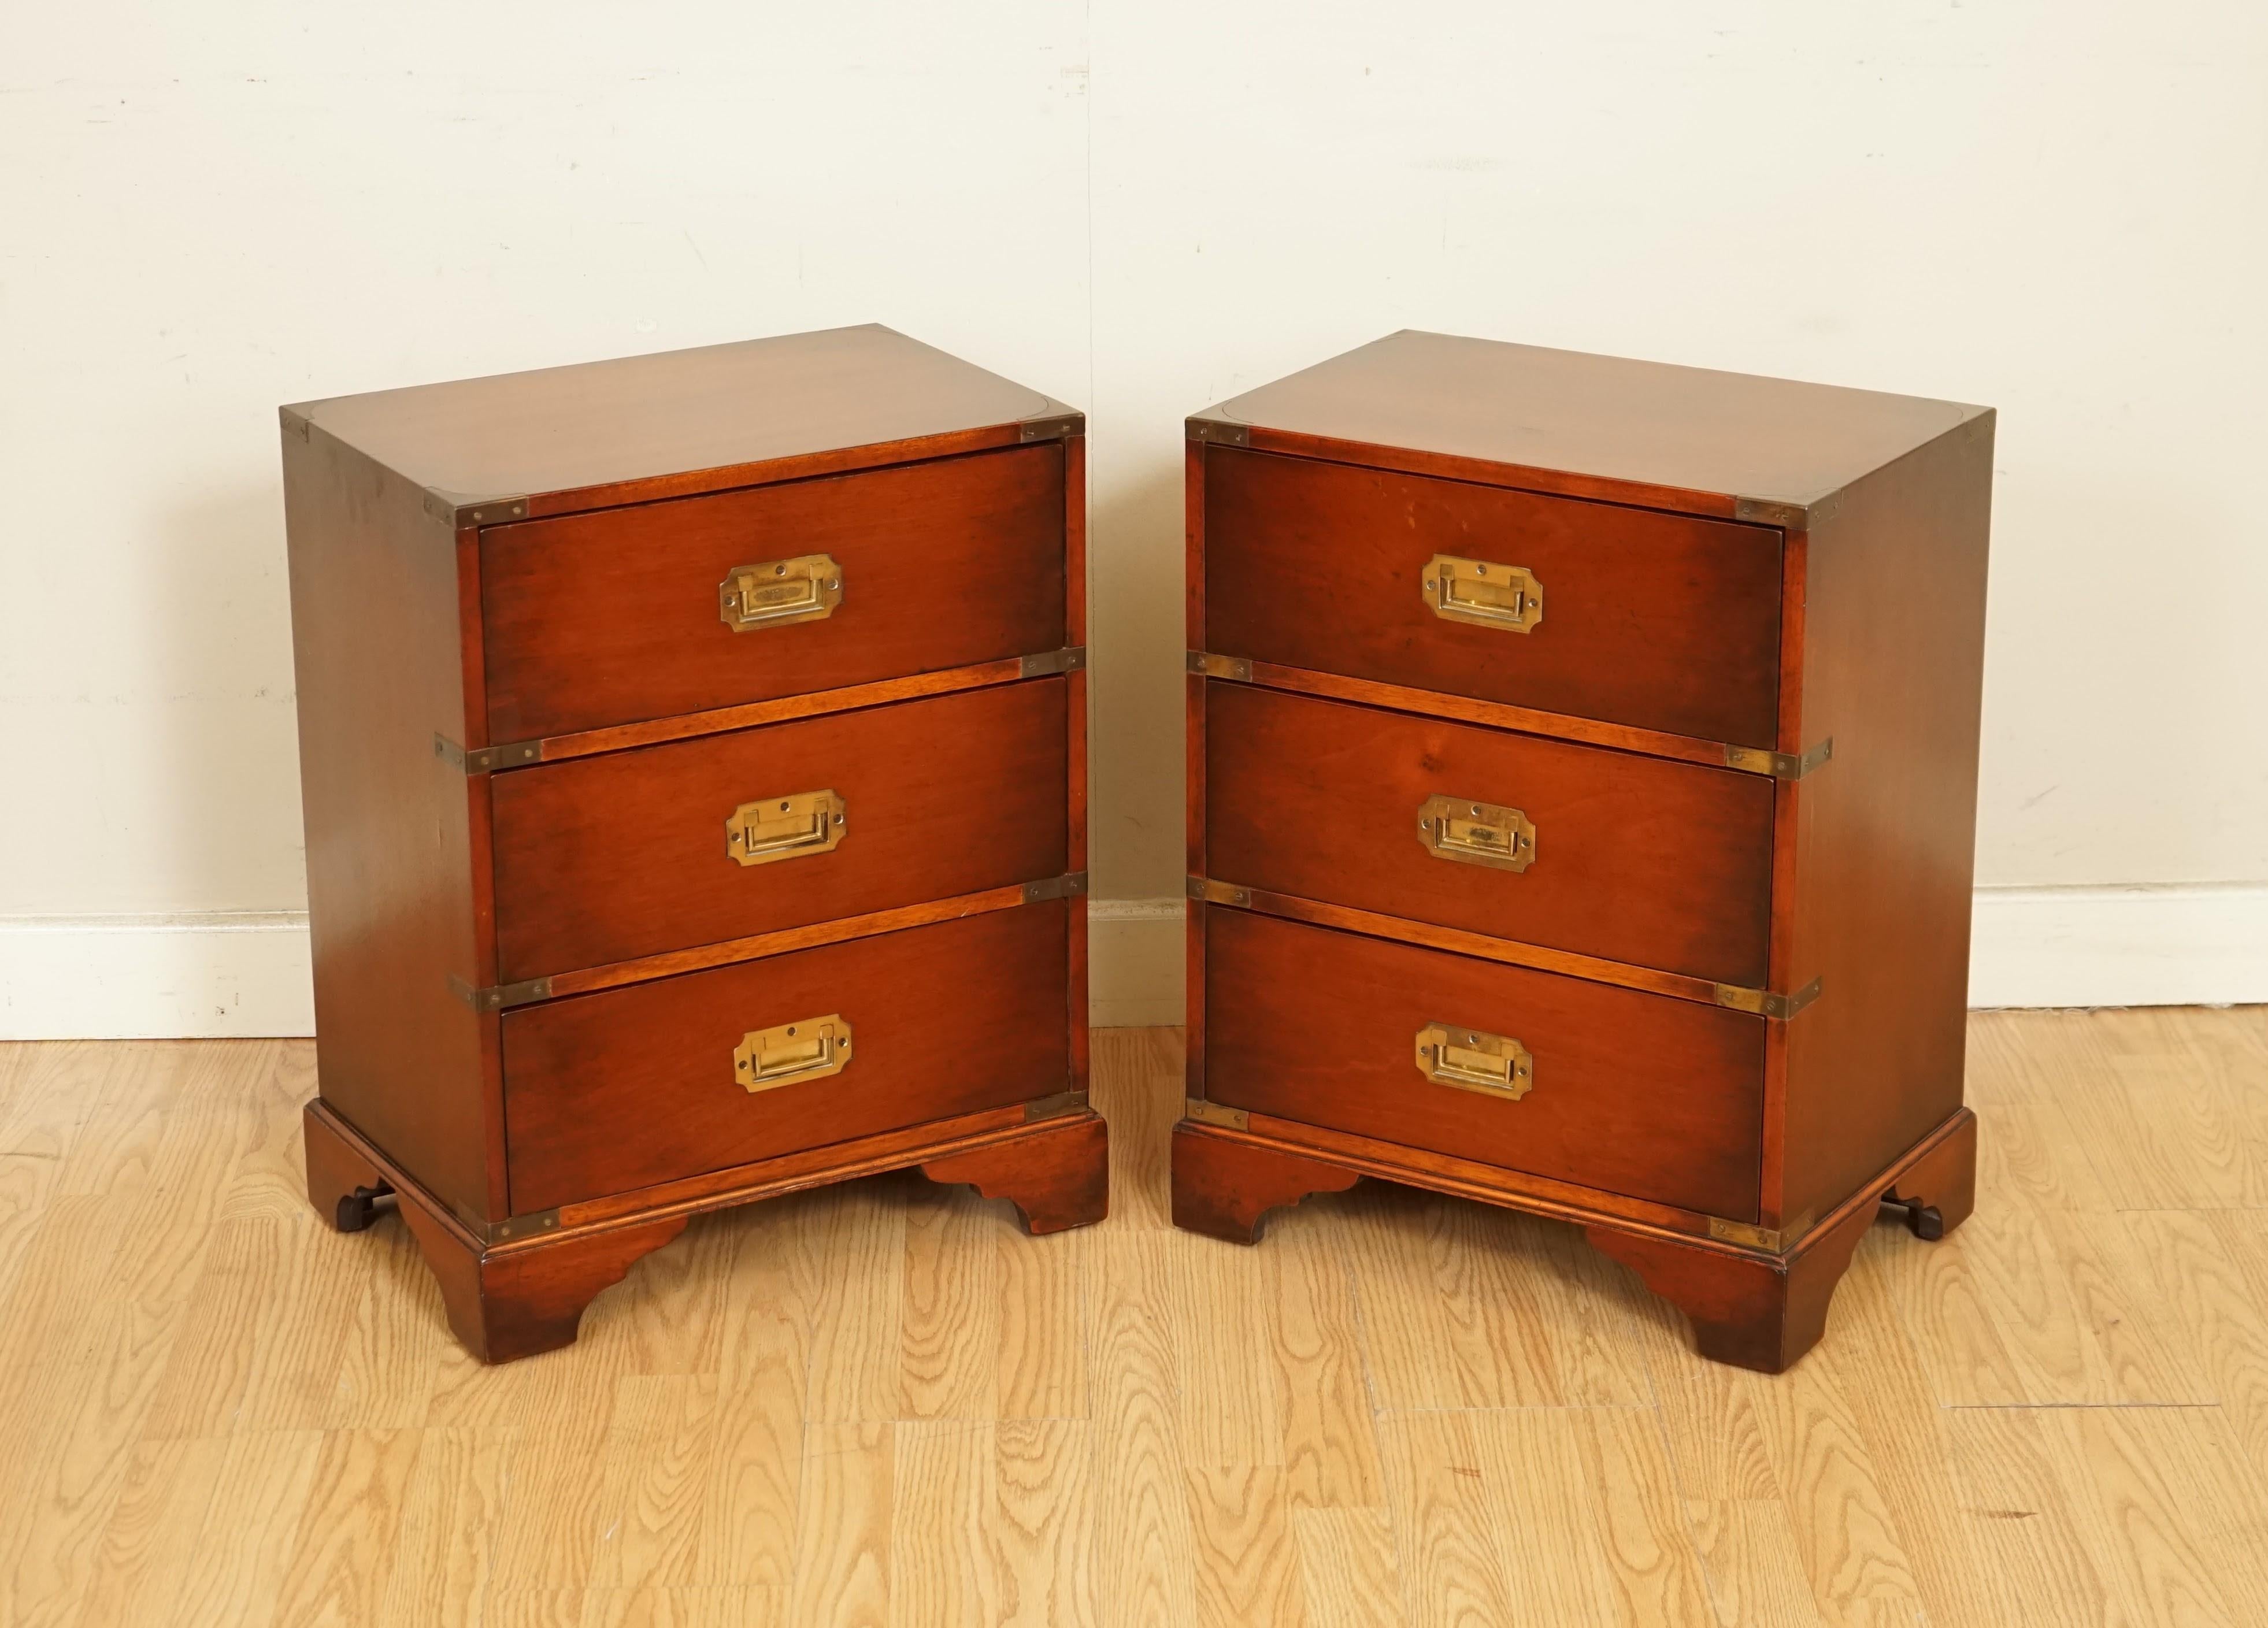 We are so excited to present to you this Stunning Pair of Military Campaign Bedside Tables.

Each table feautres 3 drawers with vintage brass handles on each drawer.

All the brass is naturally aged and untouched to give it the nice vintage look